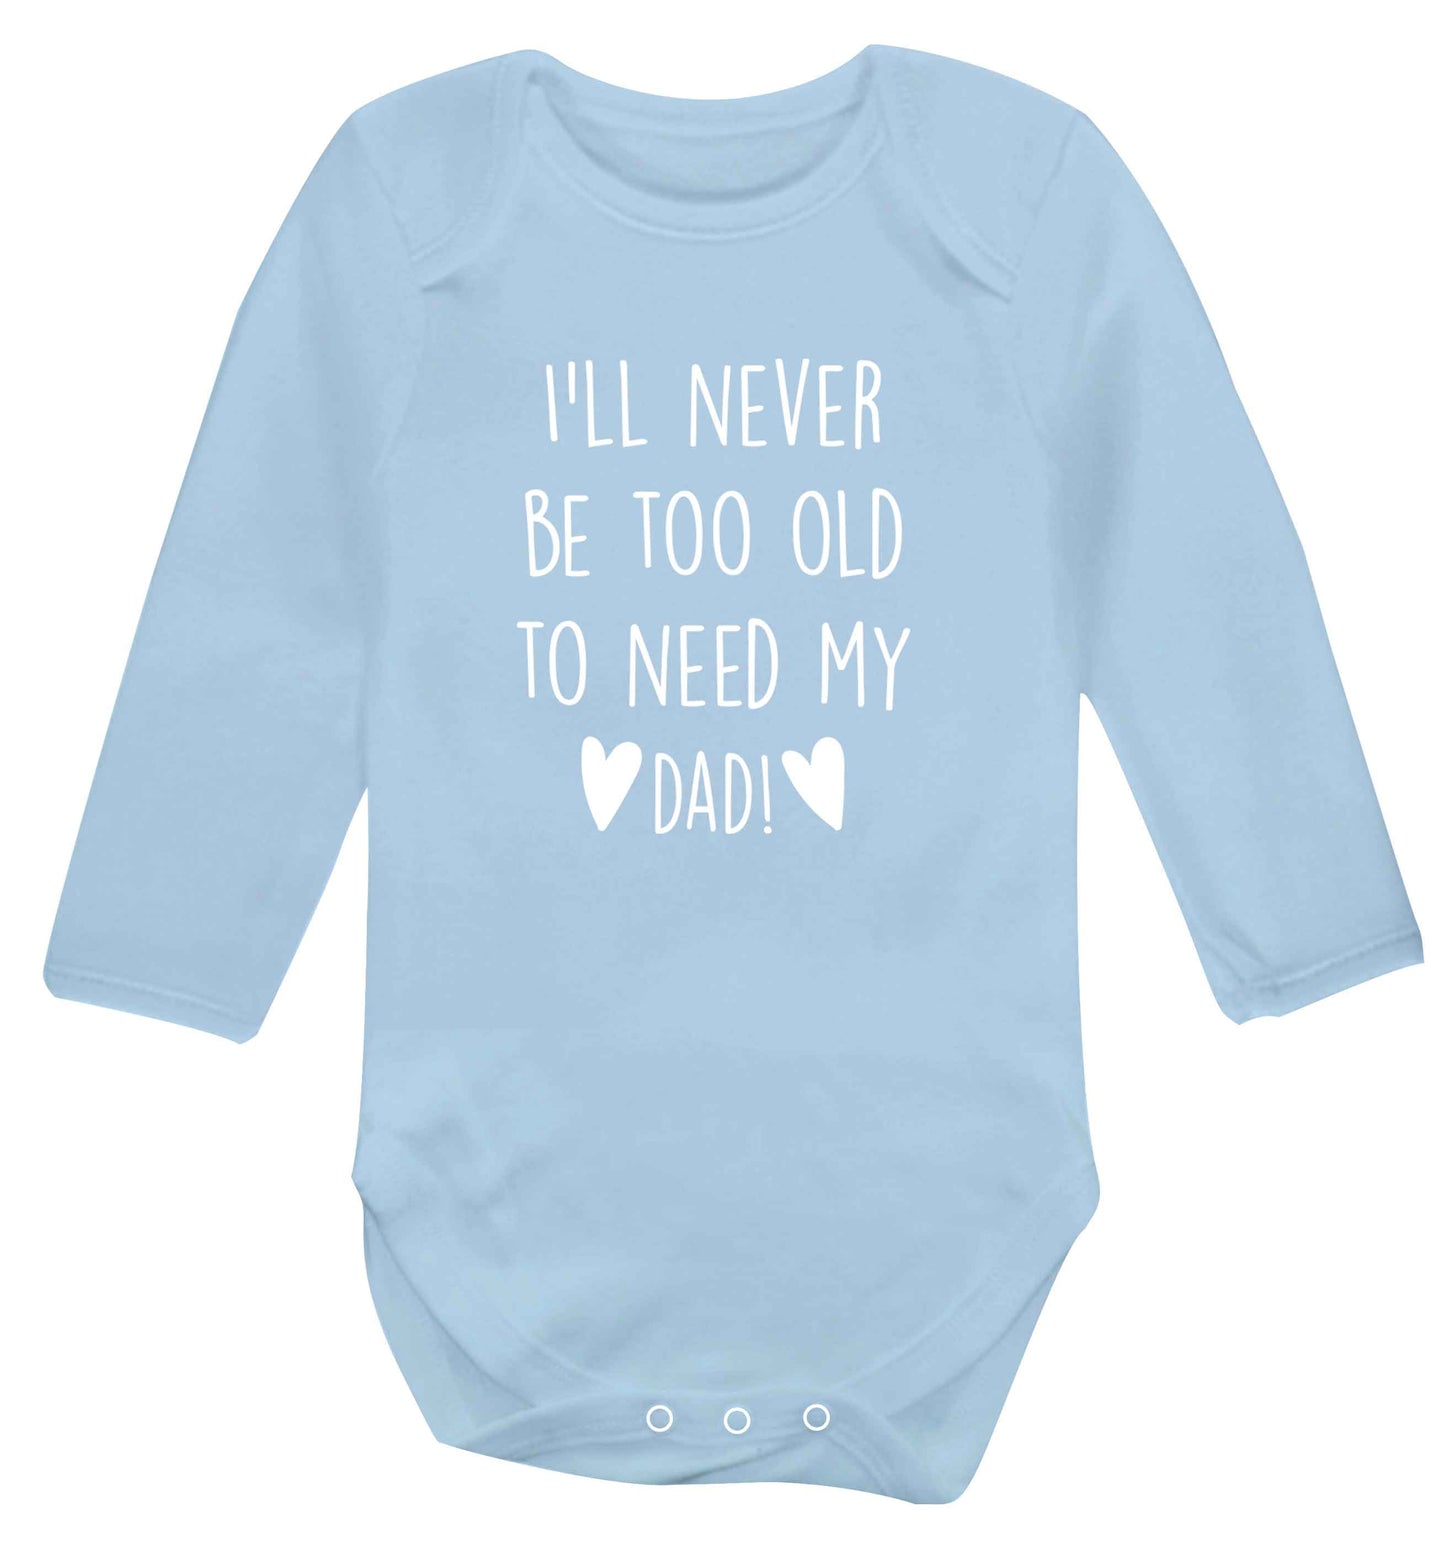 I'll never be too old to need my dad baby vest long sleeved pale blue 6-12 months